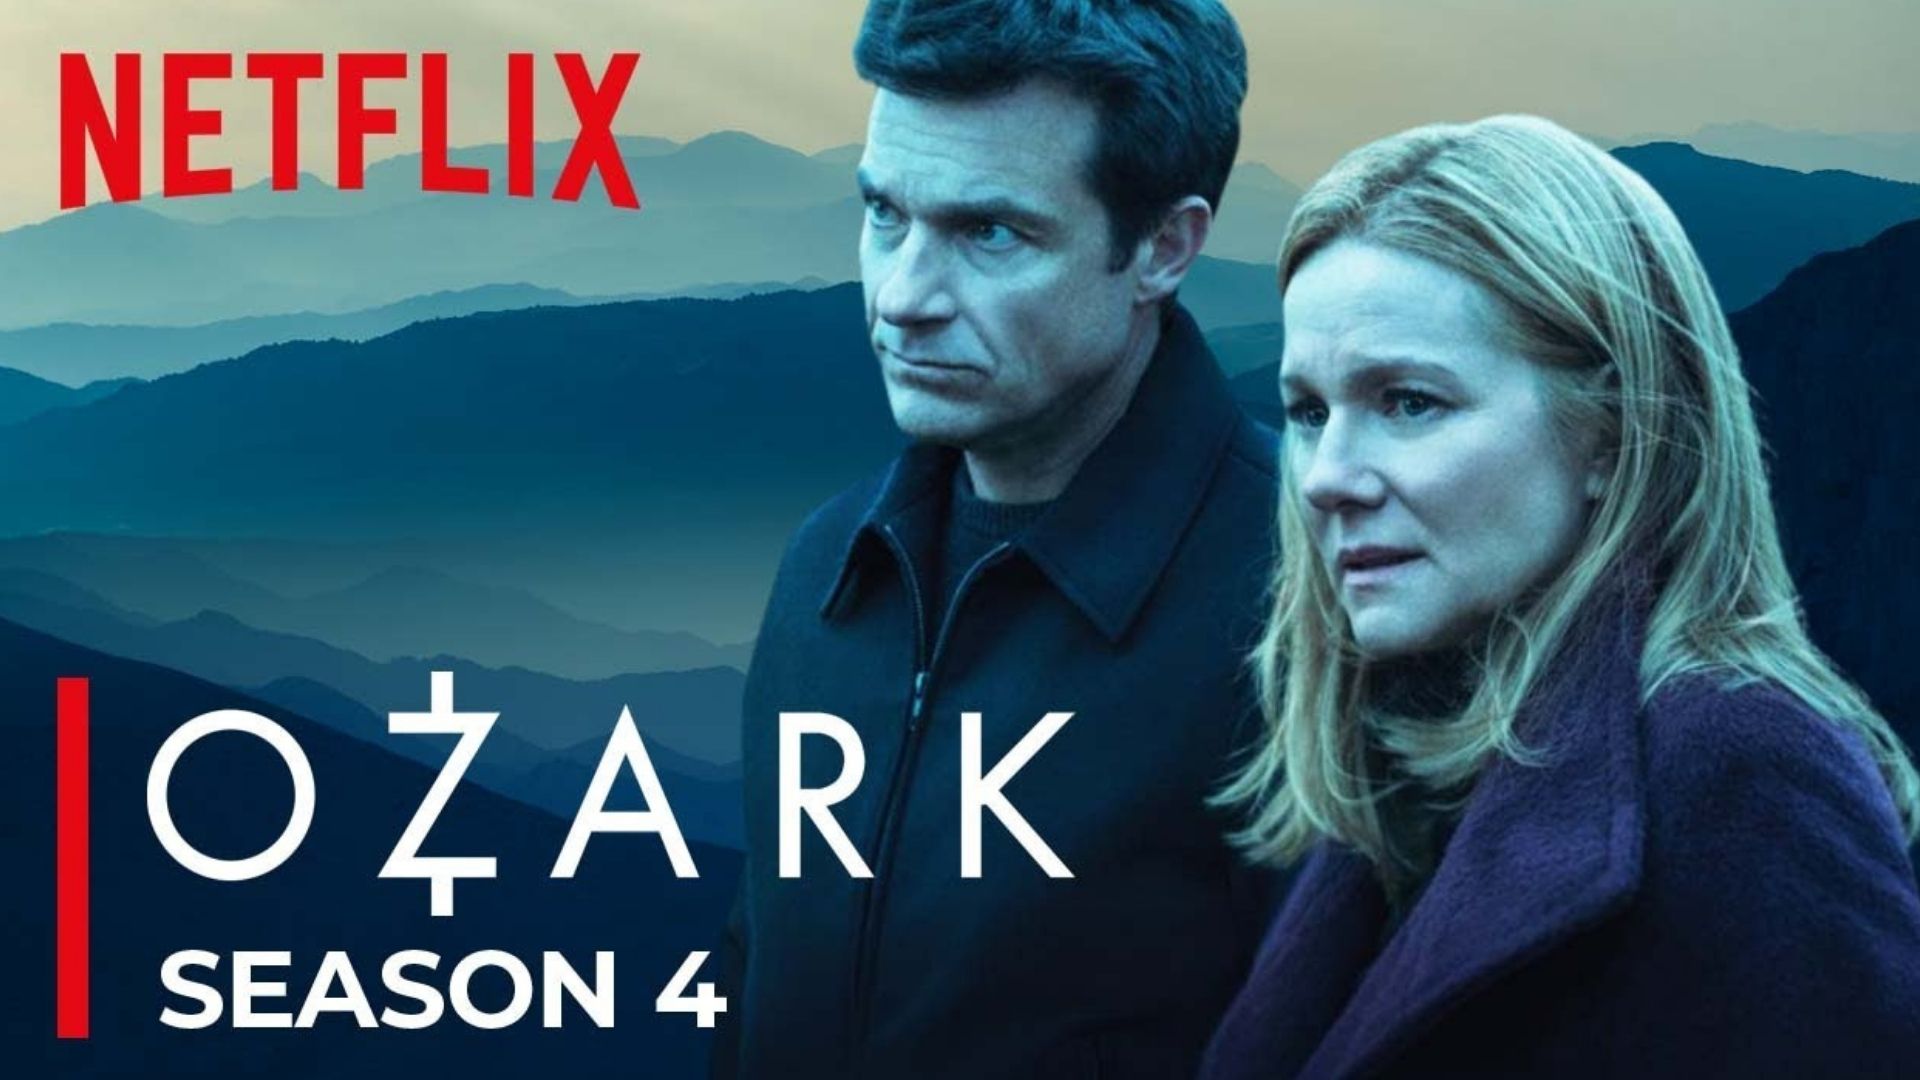 Ozark Season 4 Release Date, Cast, and other details